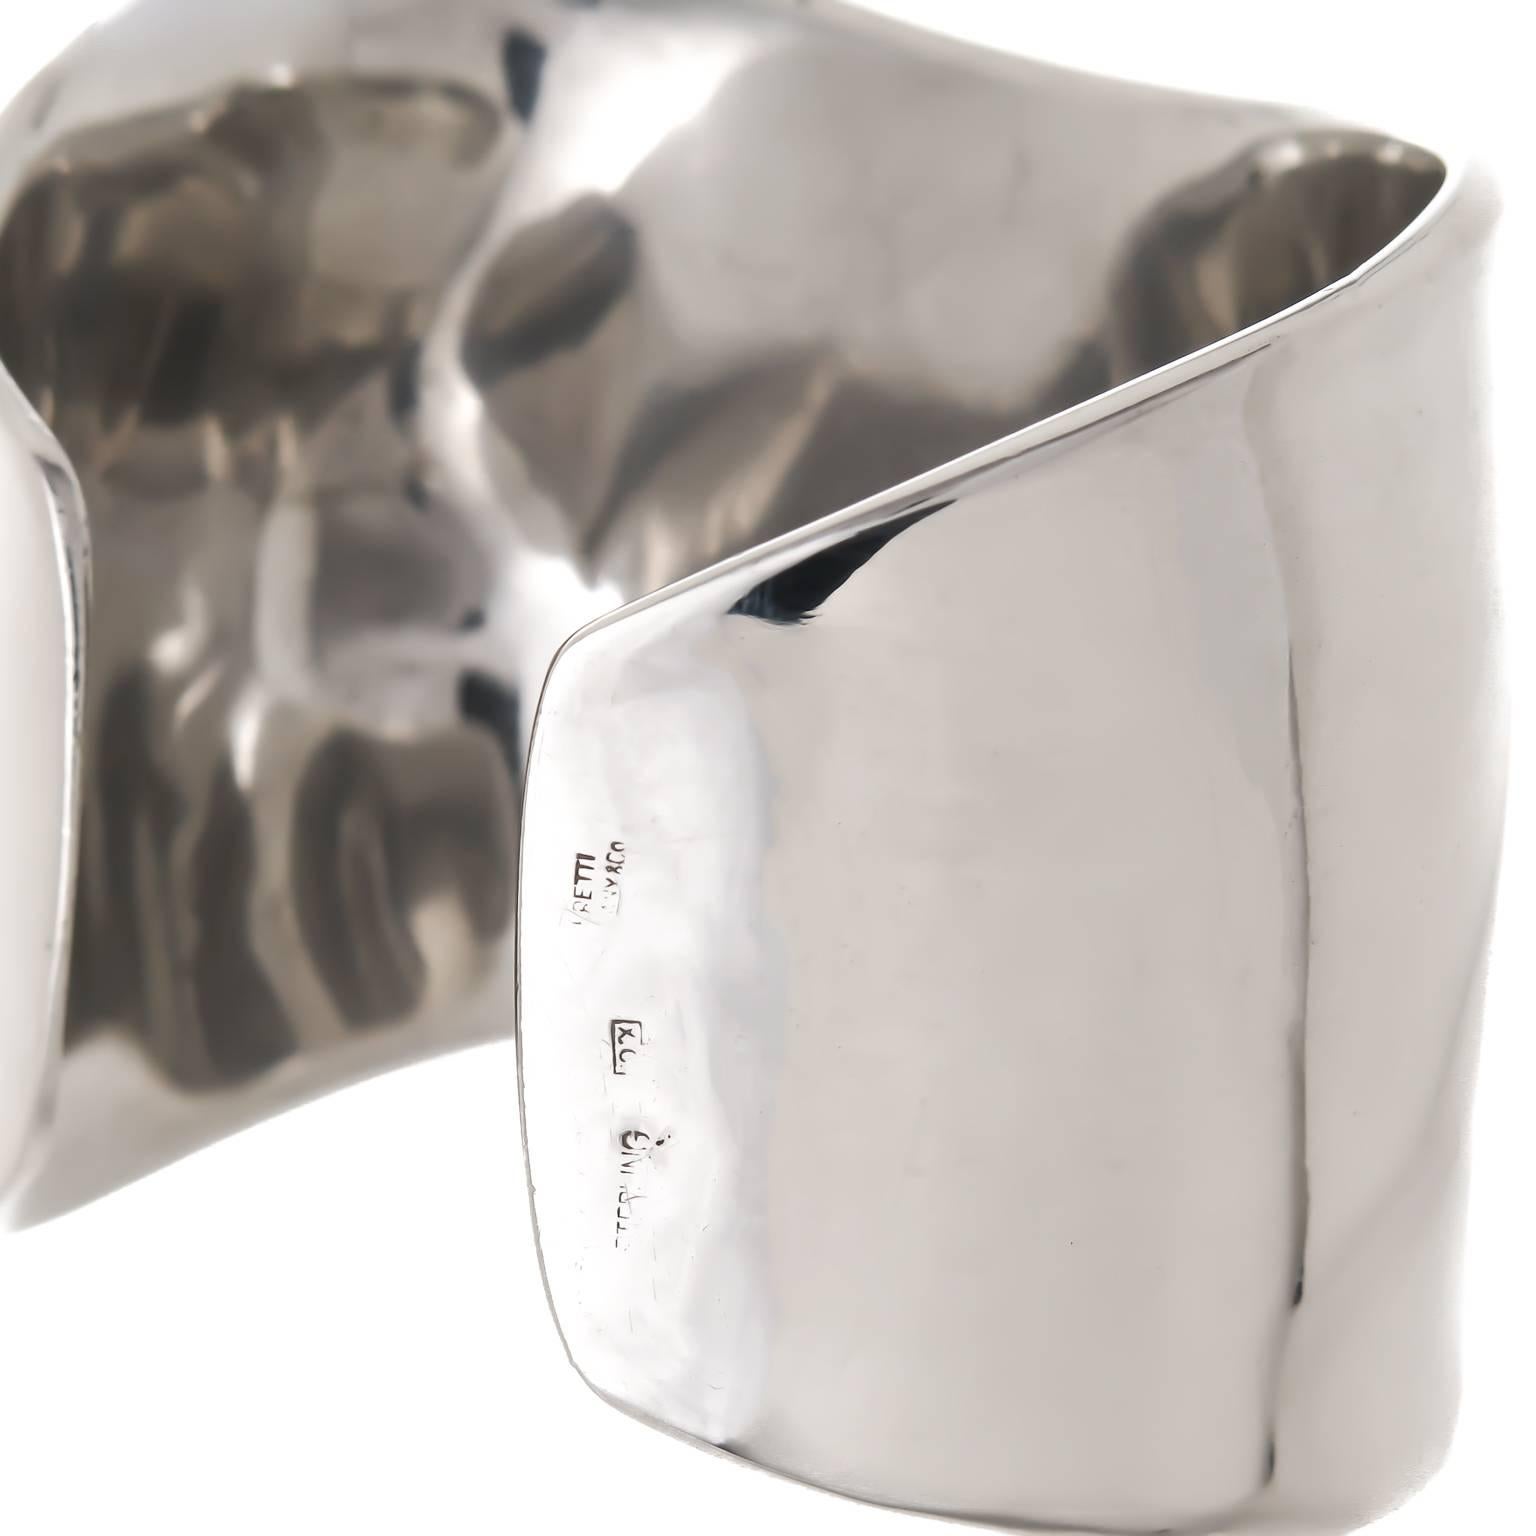 Circa 1990s Elsa Peretti for Tiffany & Company Bone Cuff Bracelet, measuring 1 1/2 to 2 inch wide, adjustable opening to fit most wrists. Comes in Original Tiffany pouch.